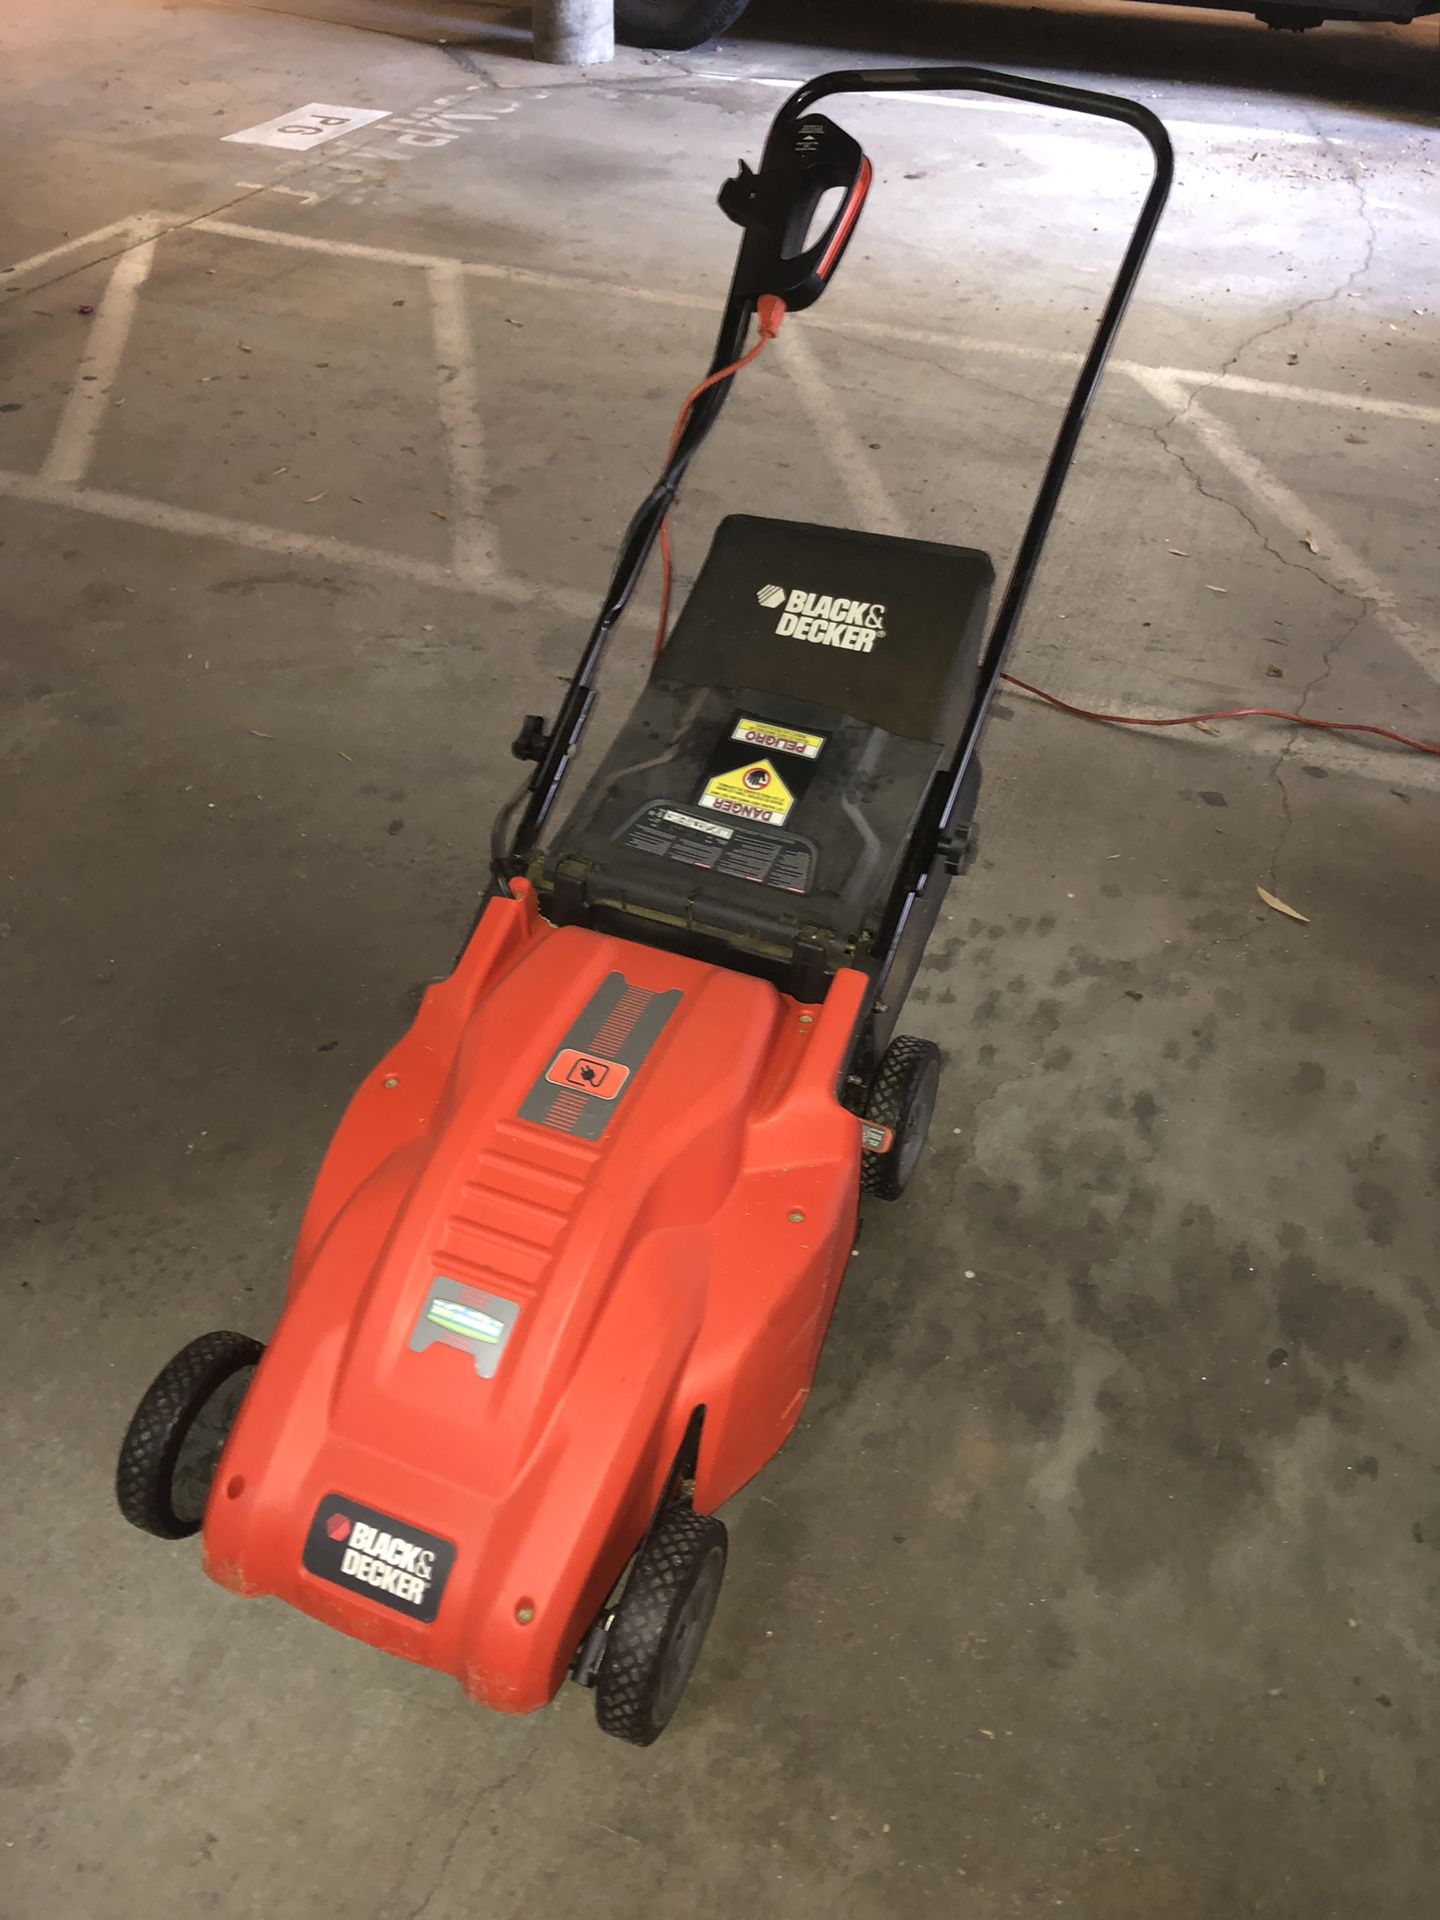 Electric lawn mower runs with cord